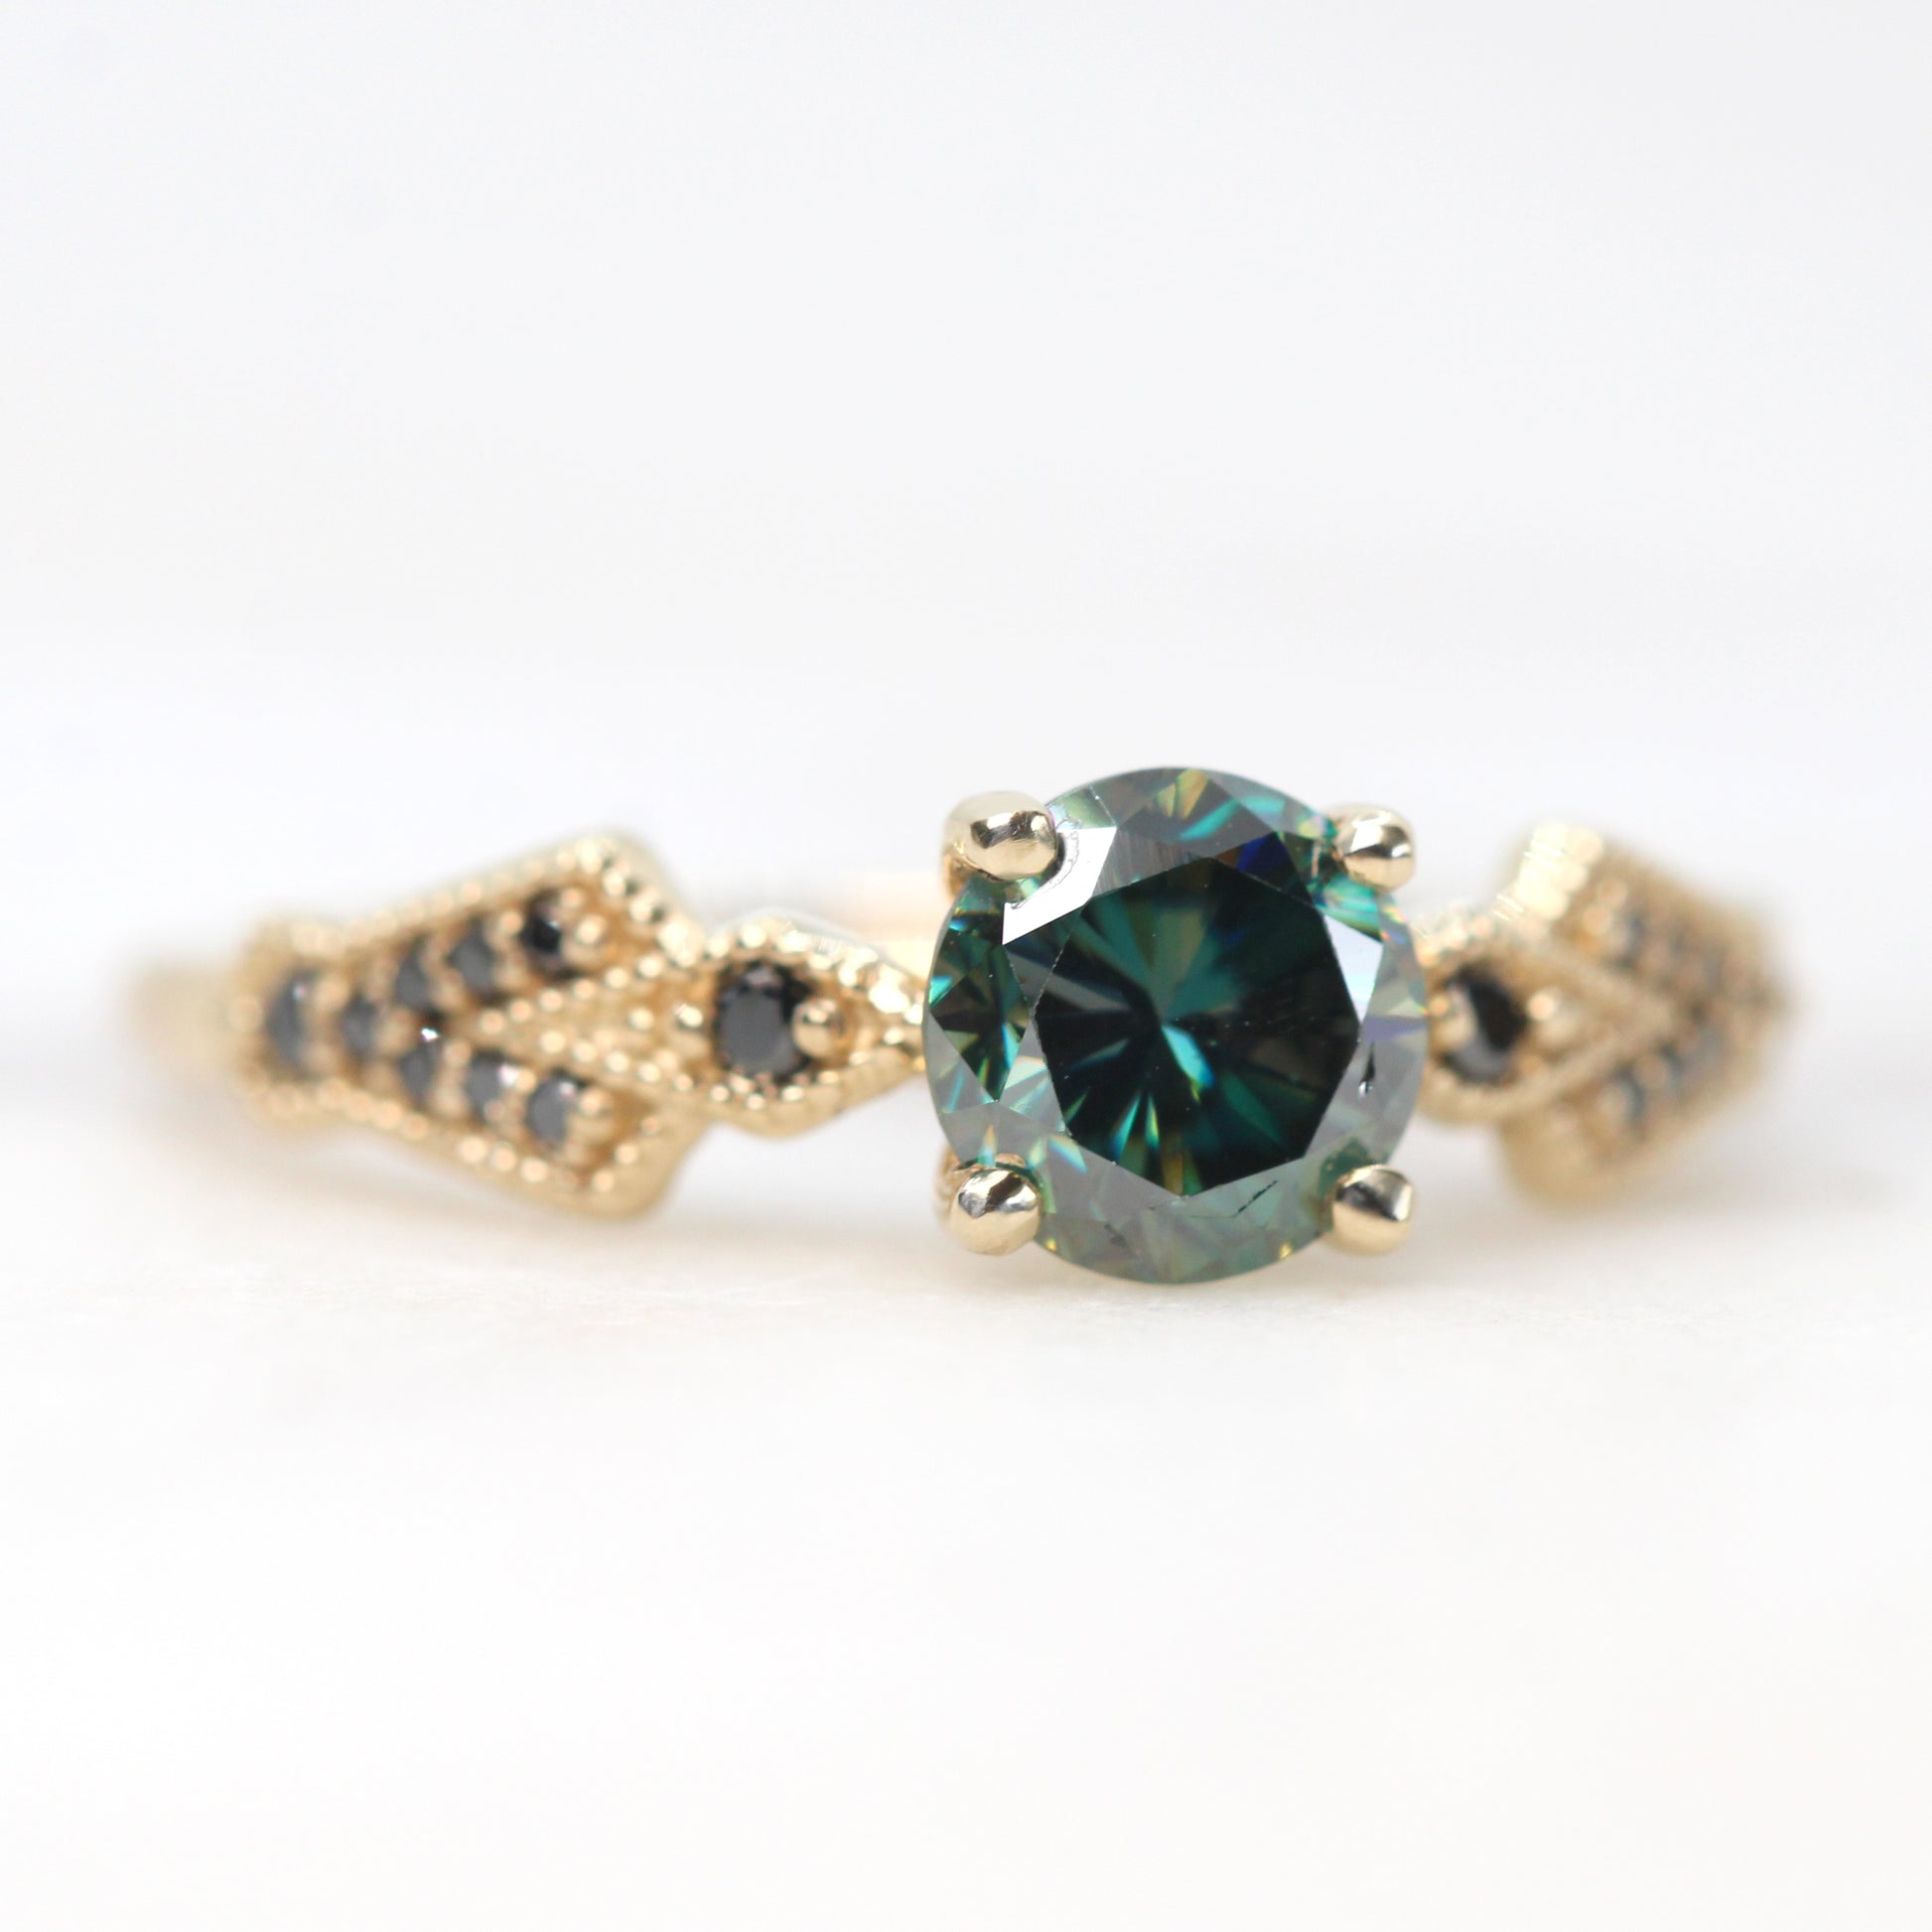 Darian Ring with a 0.80 Carat Round Black and Teal Moissanite and Black Accent Diamonds in 10k Yellow Gold - Ready to Size and Ship - Midwinter Co. Alternative Bridal Rings and Modern Fine Jewelry